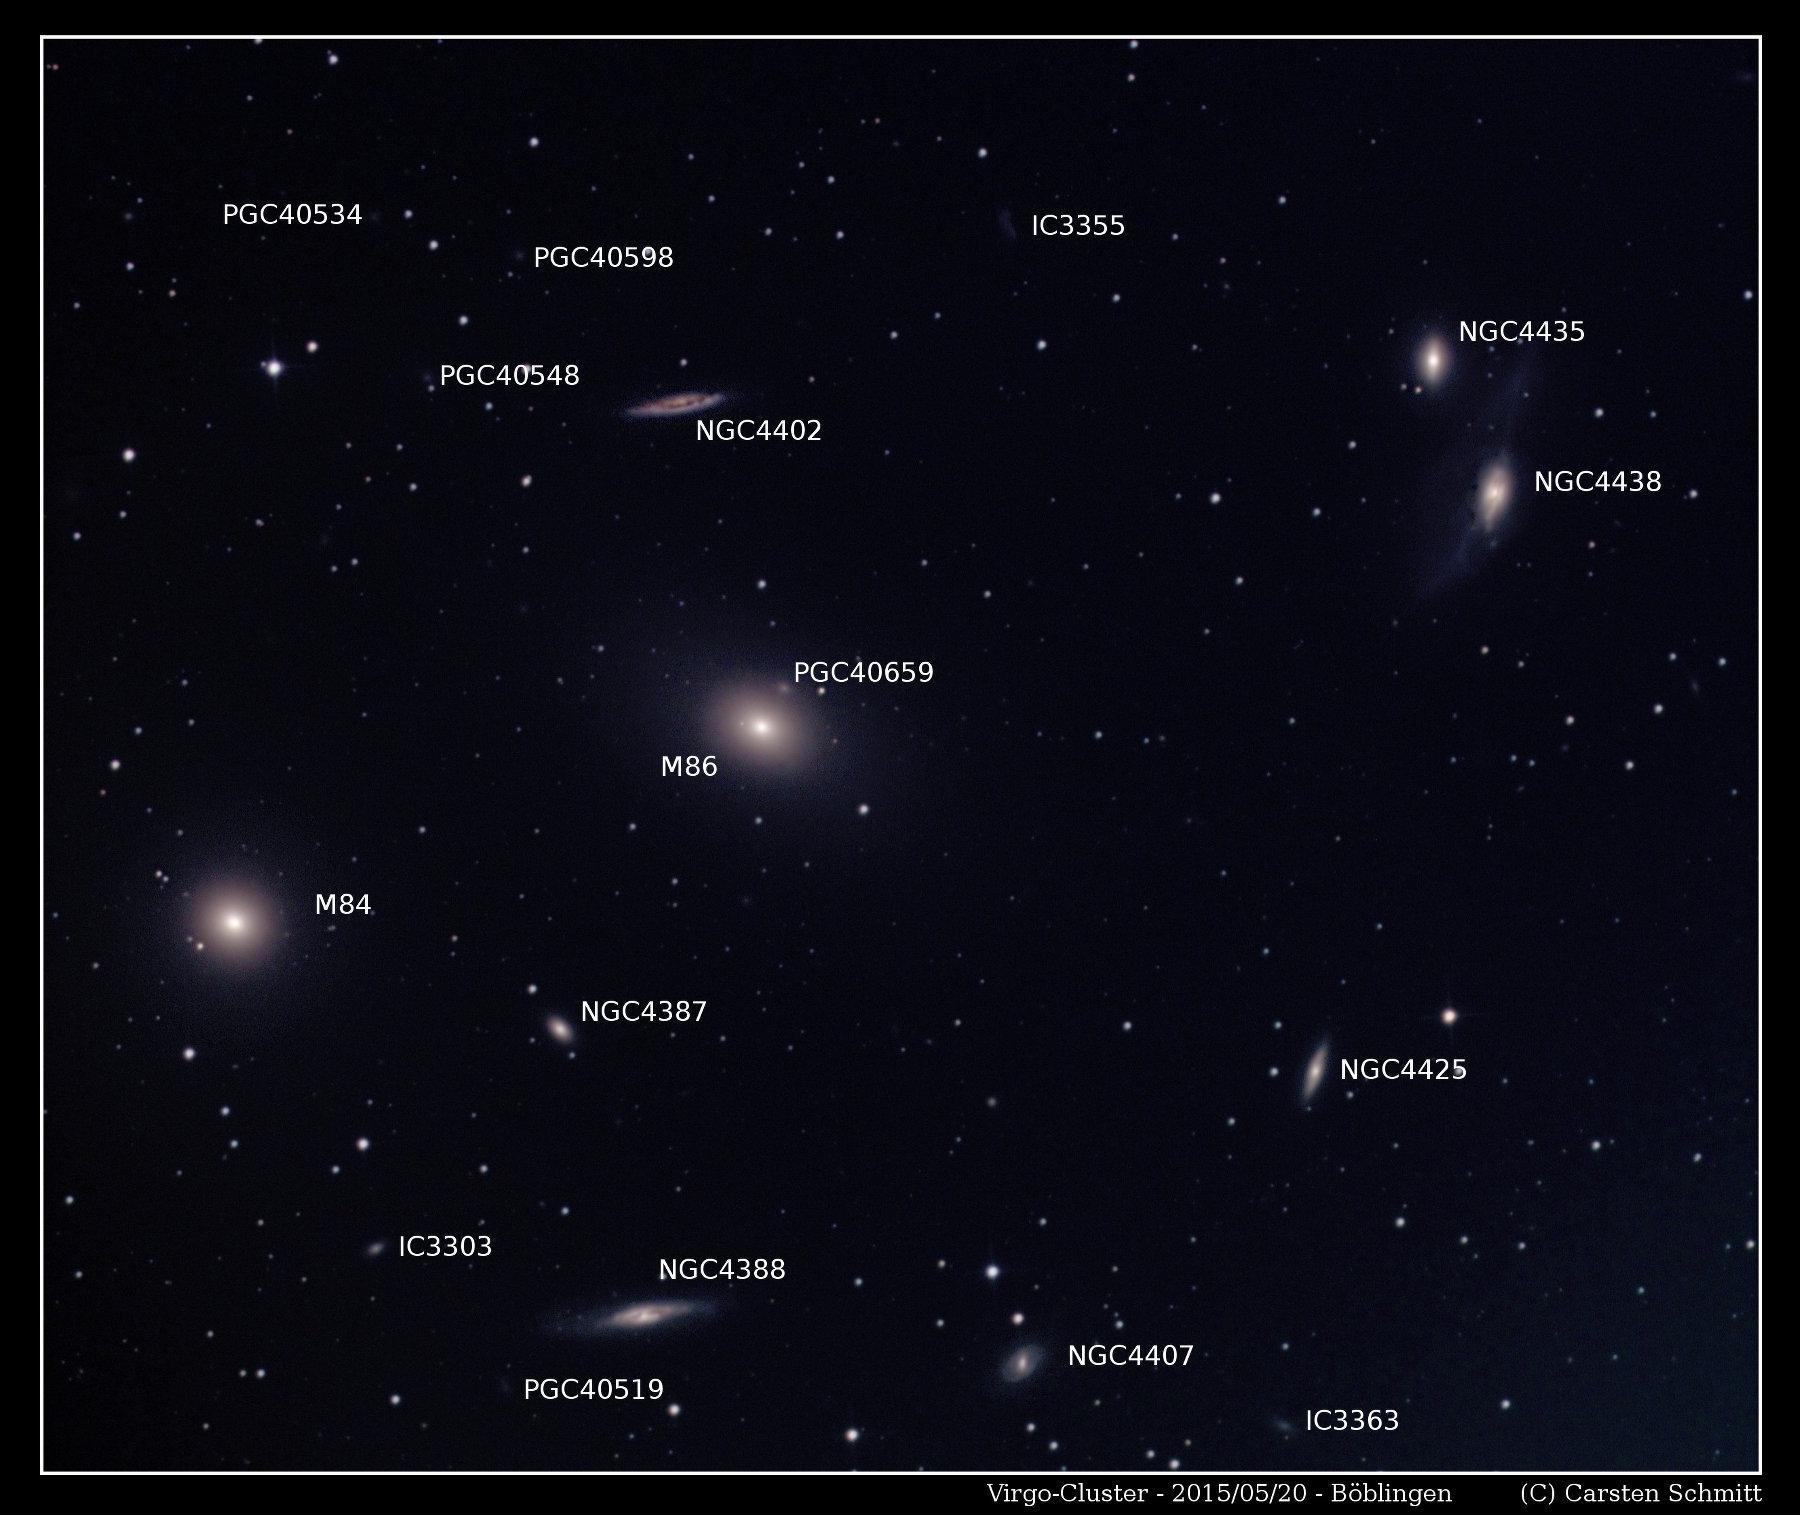 Virgo-Cluster with text